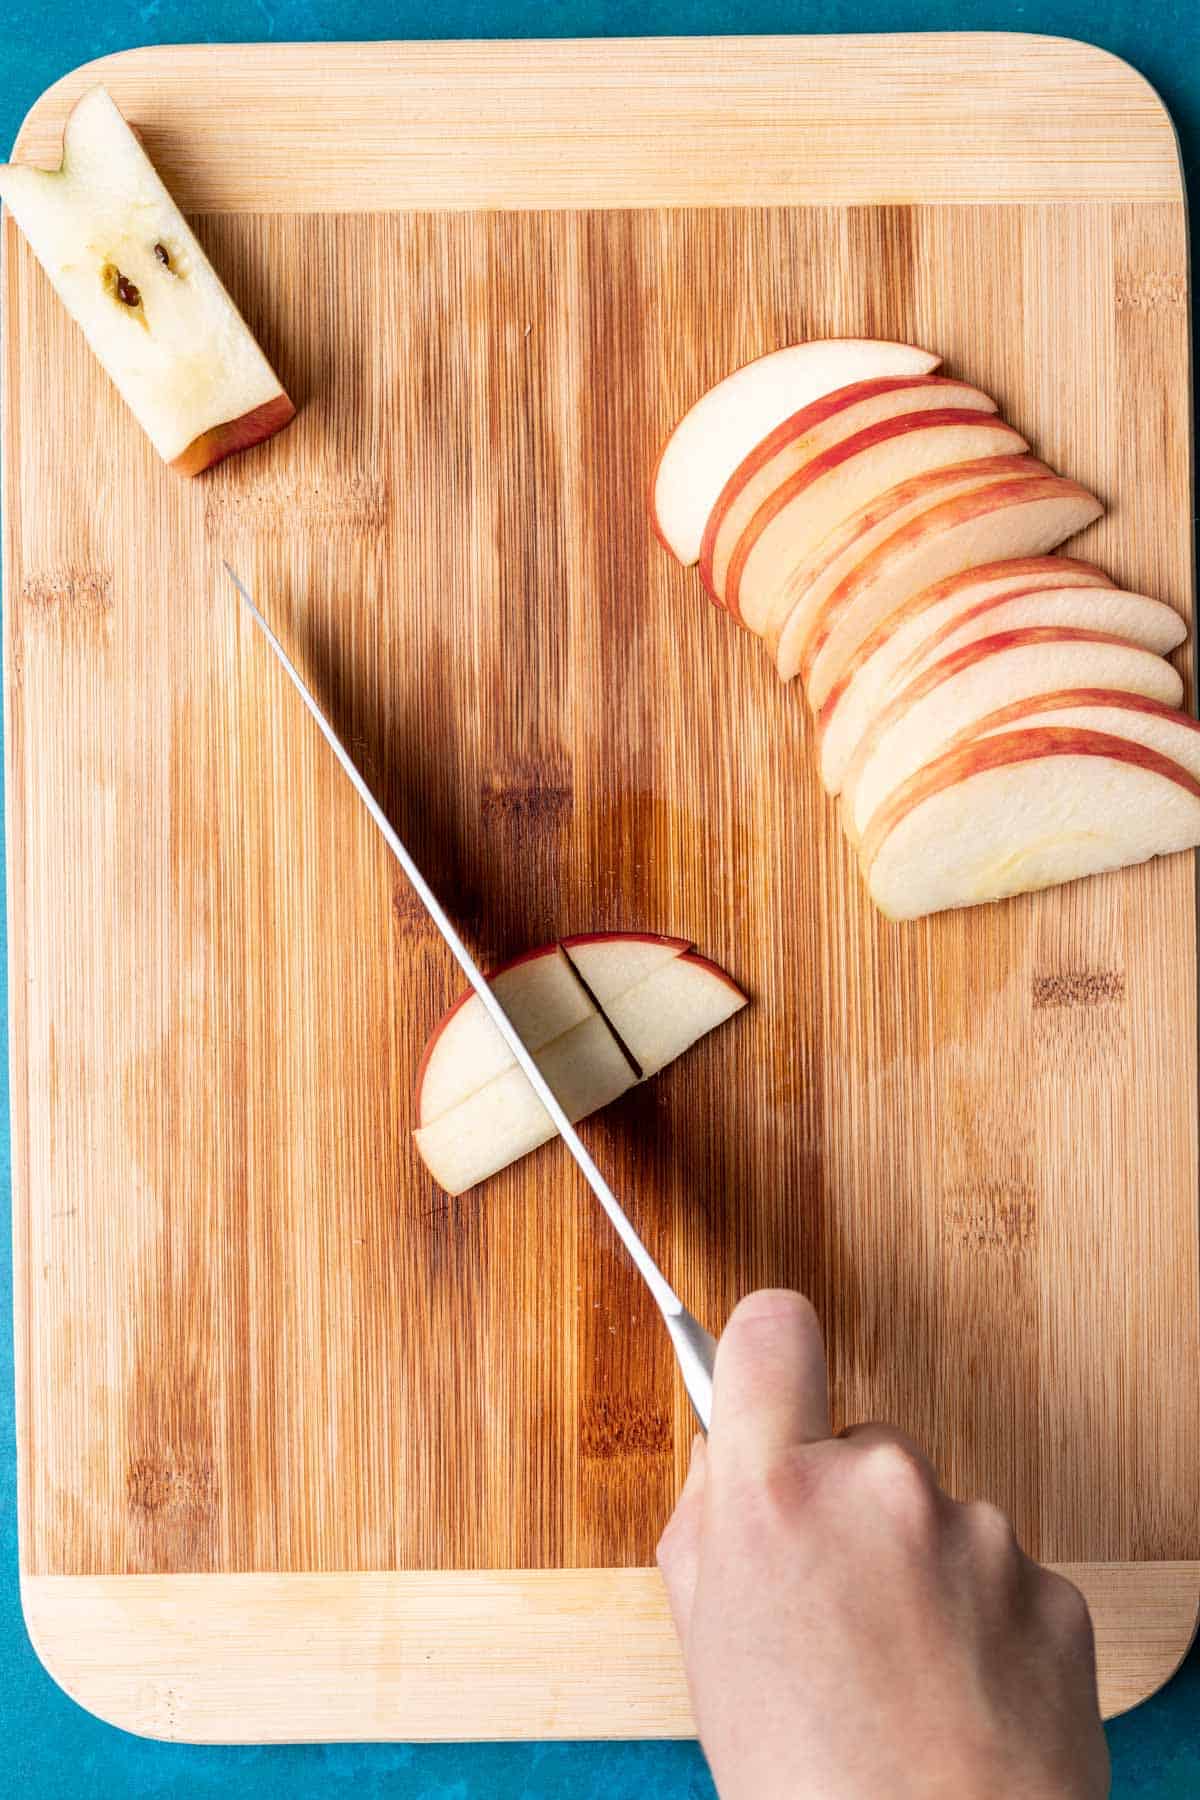 A knife cutting slices of apples into smaller pieces.